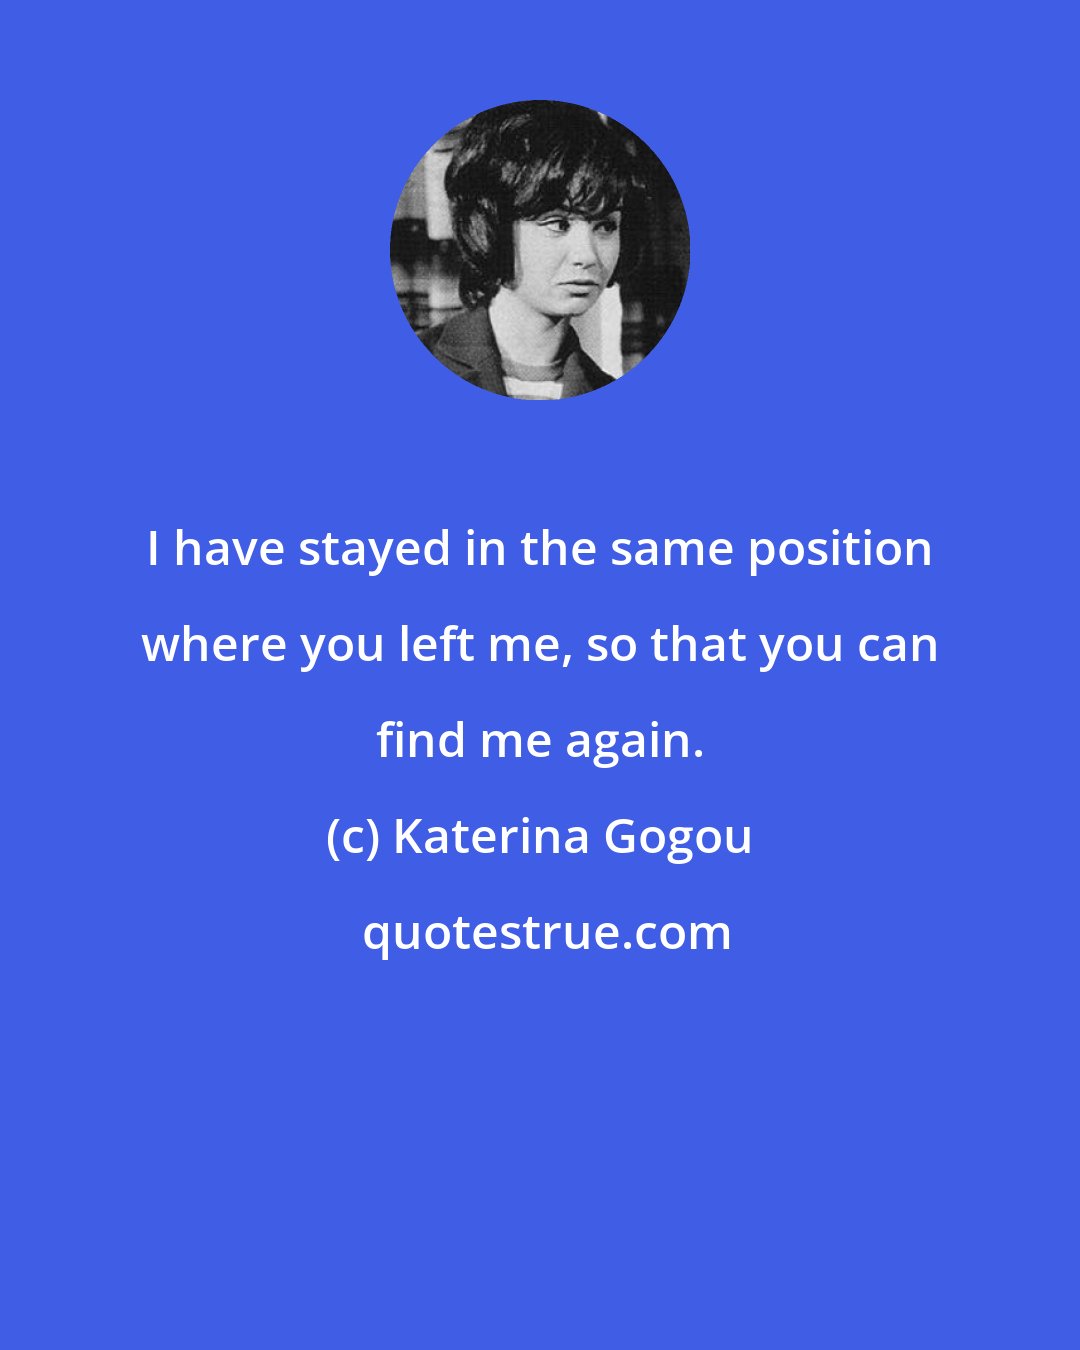 Katerina Gogou: I have stayed in the same position where you left me, so that you can find me again.